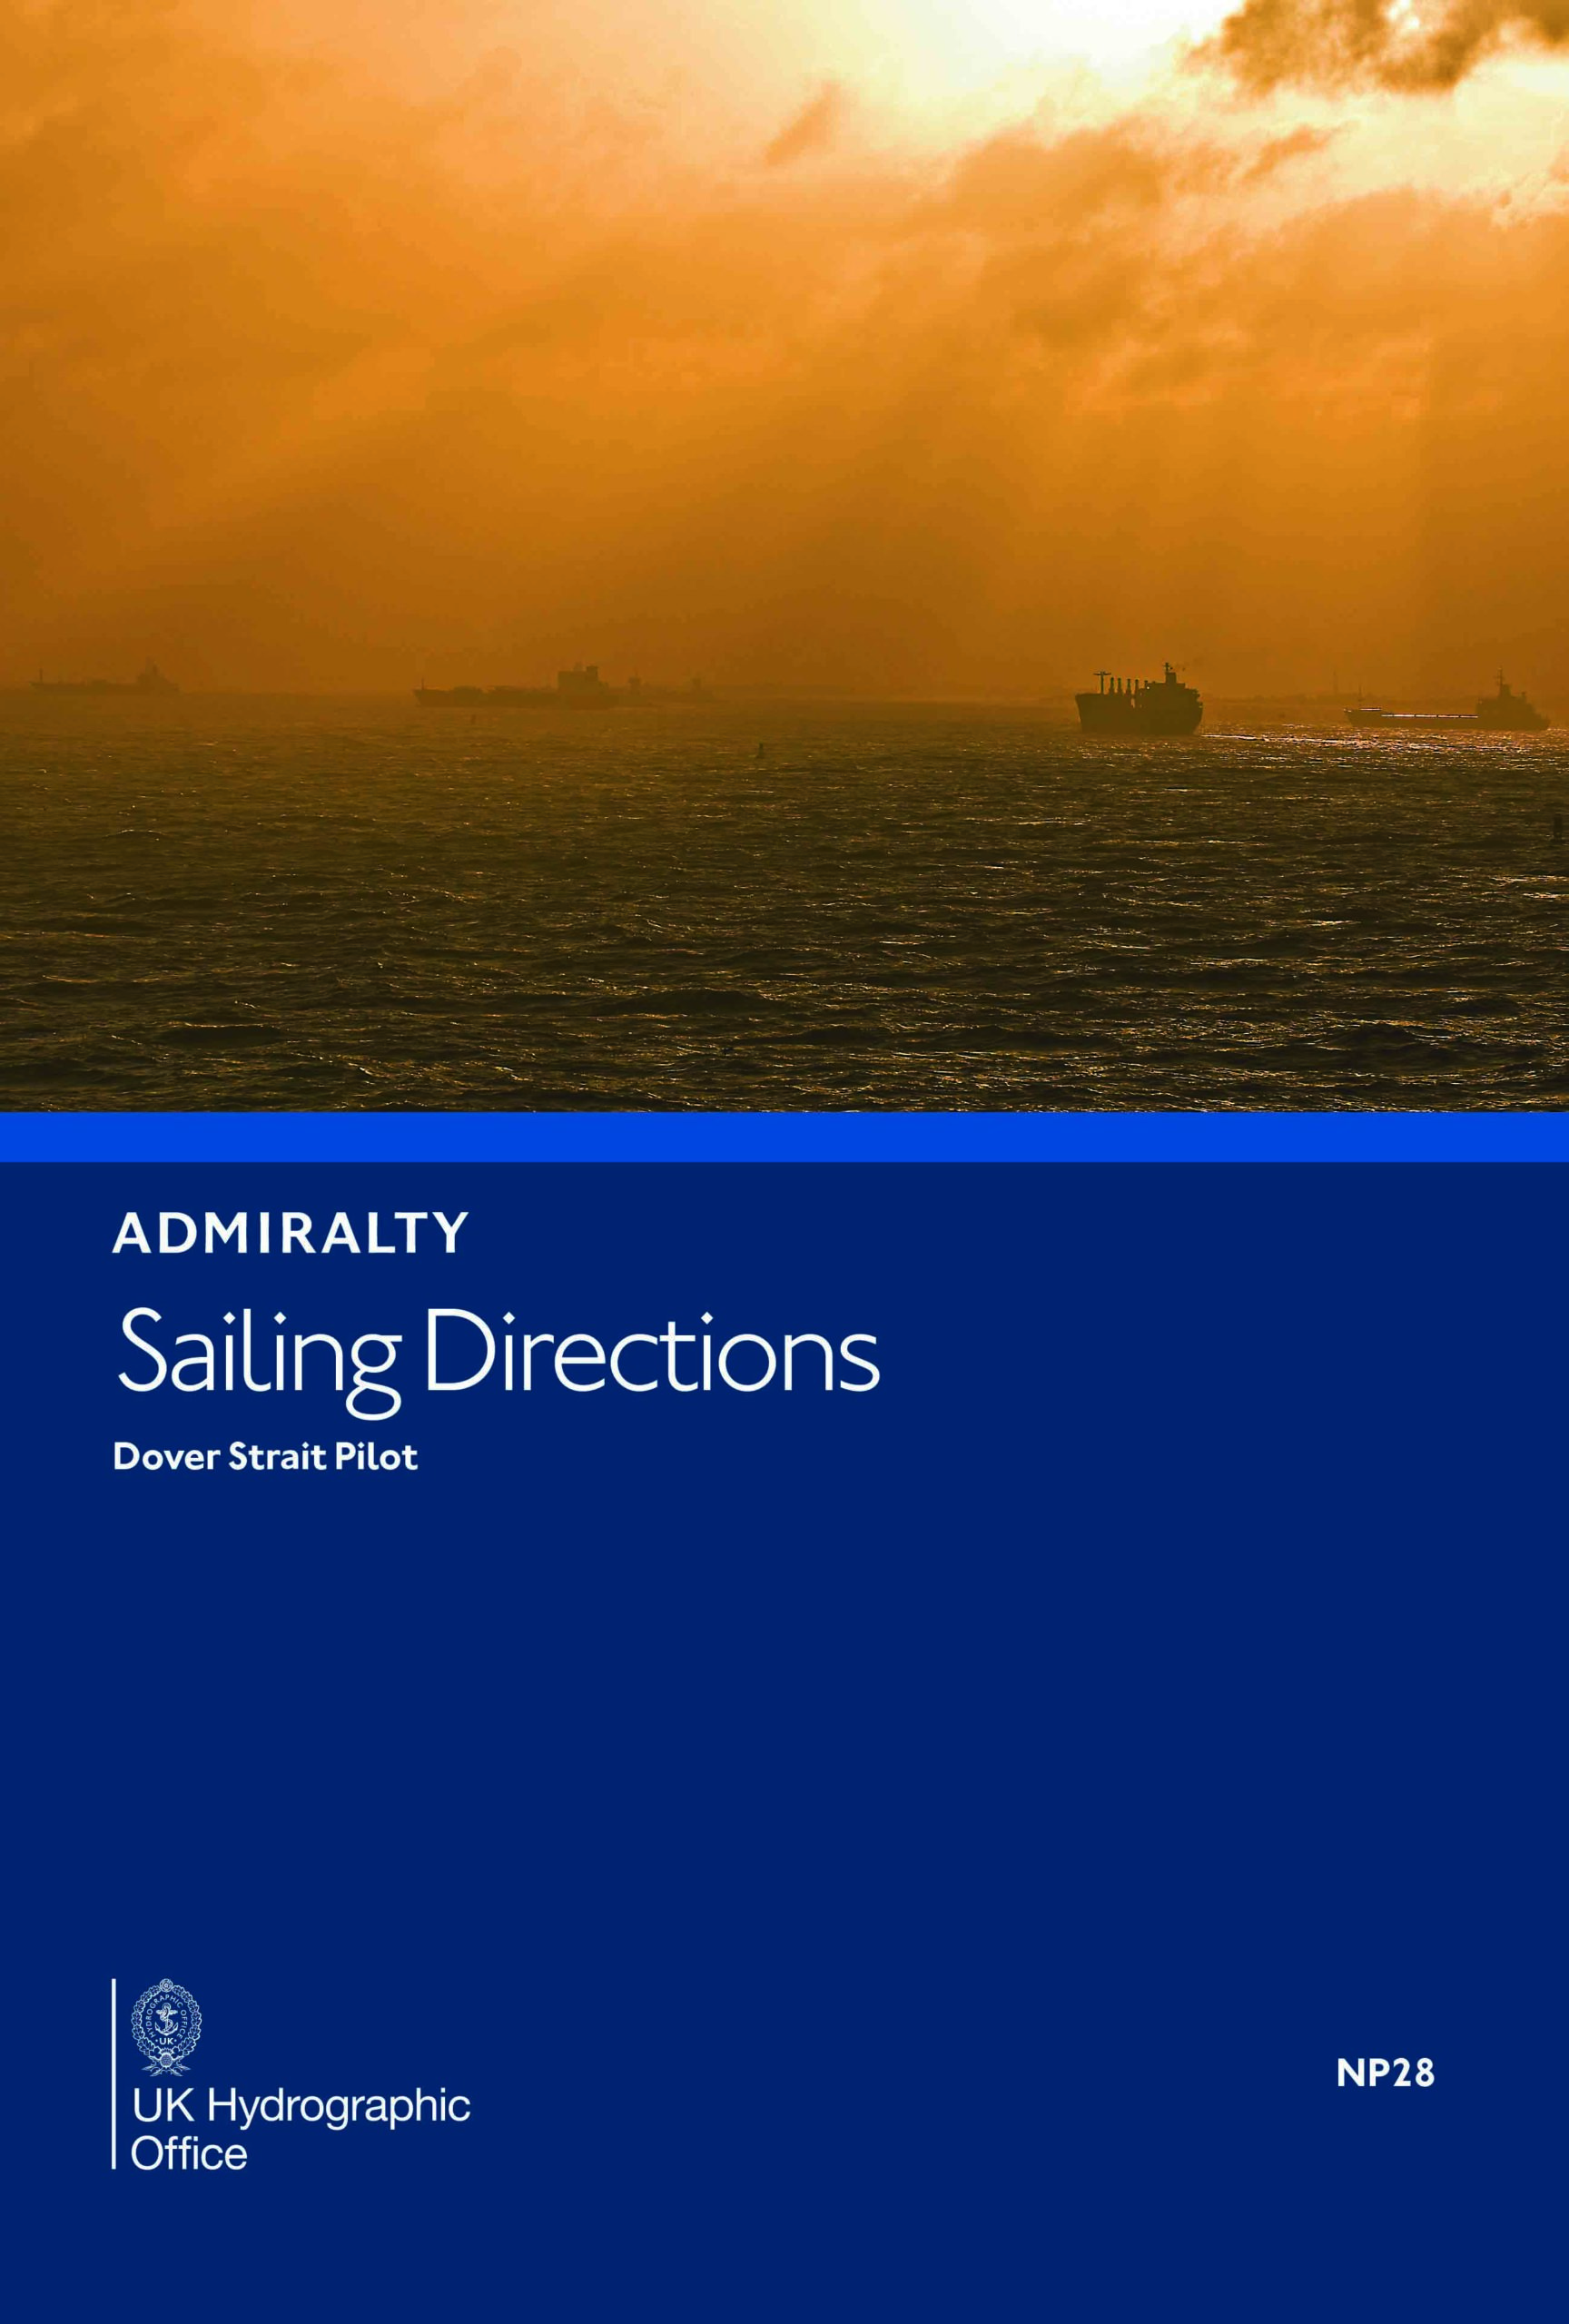 NP28 Admiralty Sailing Directions Dover Strait Pilot